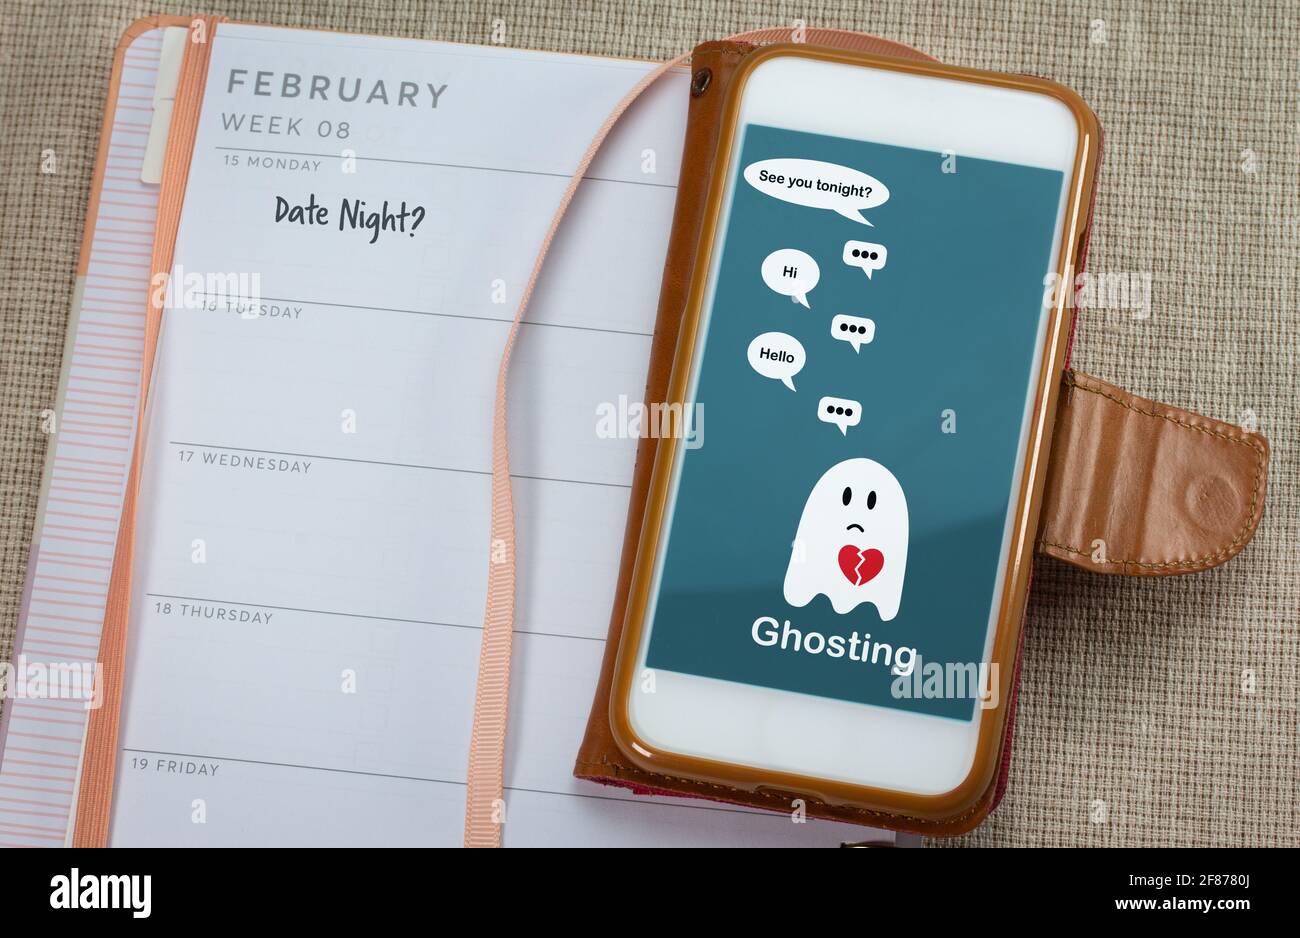 Ghosting on mobile phone on table with diary, Ghosted to cut all communication without explanation, ending a relationship. Social media dating. Stock Photo